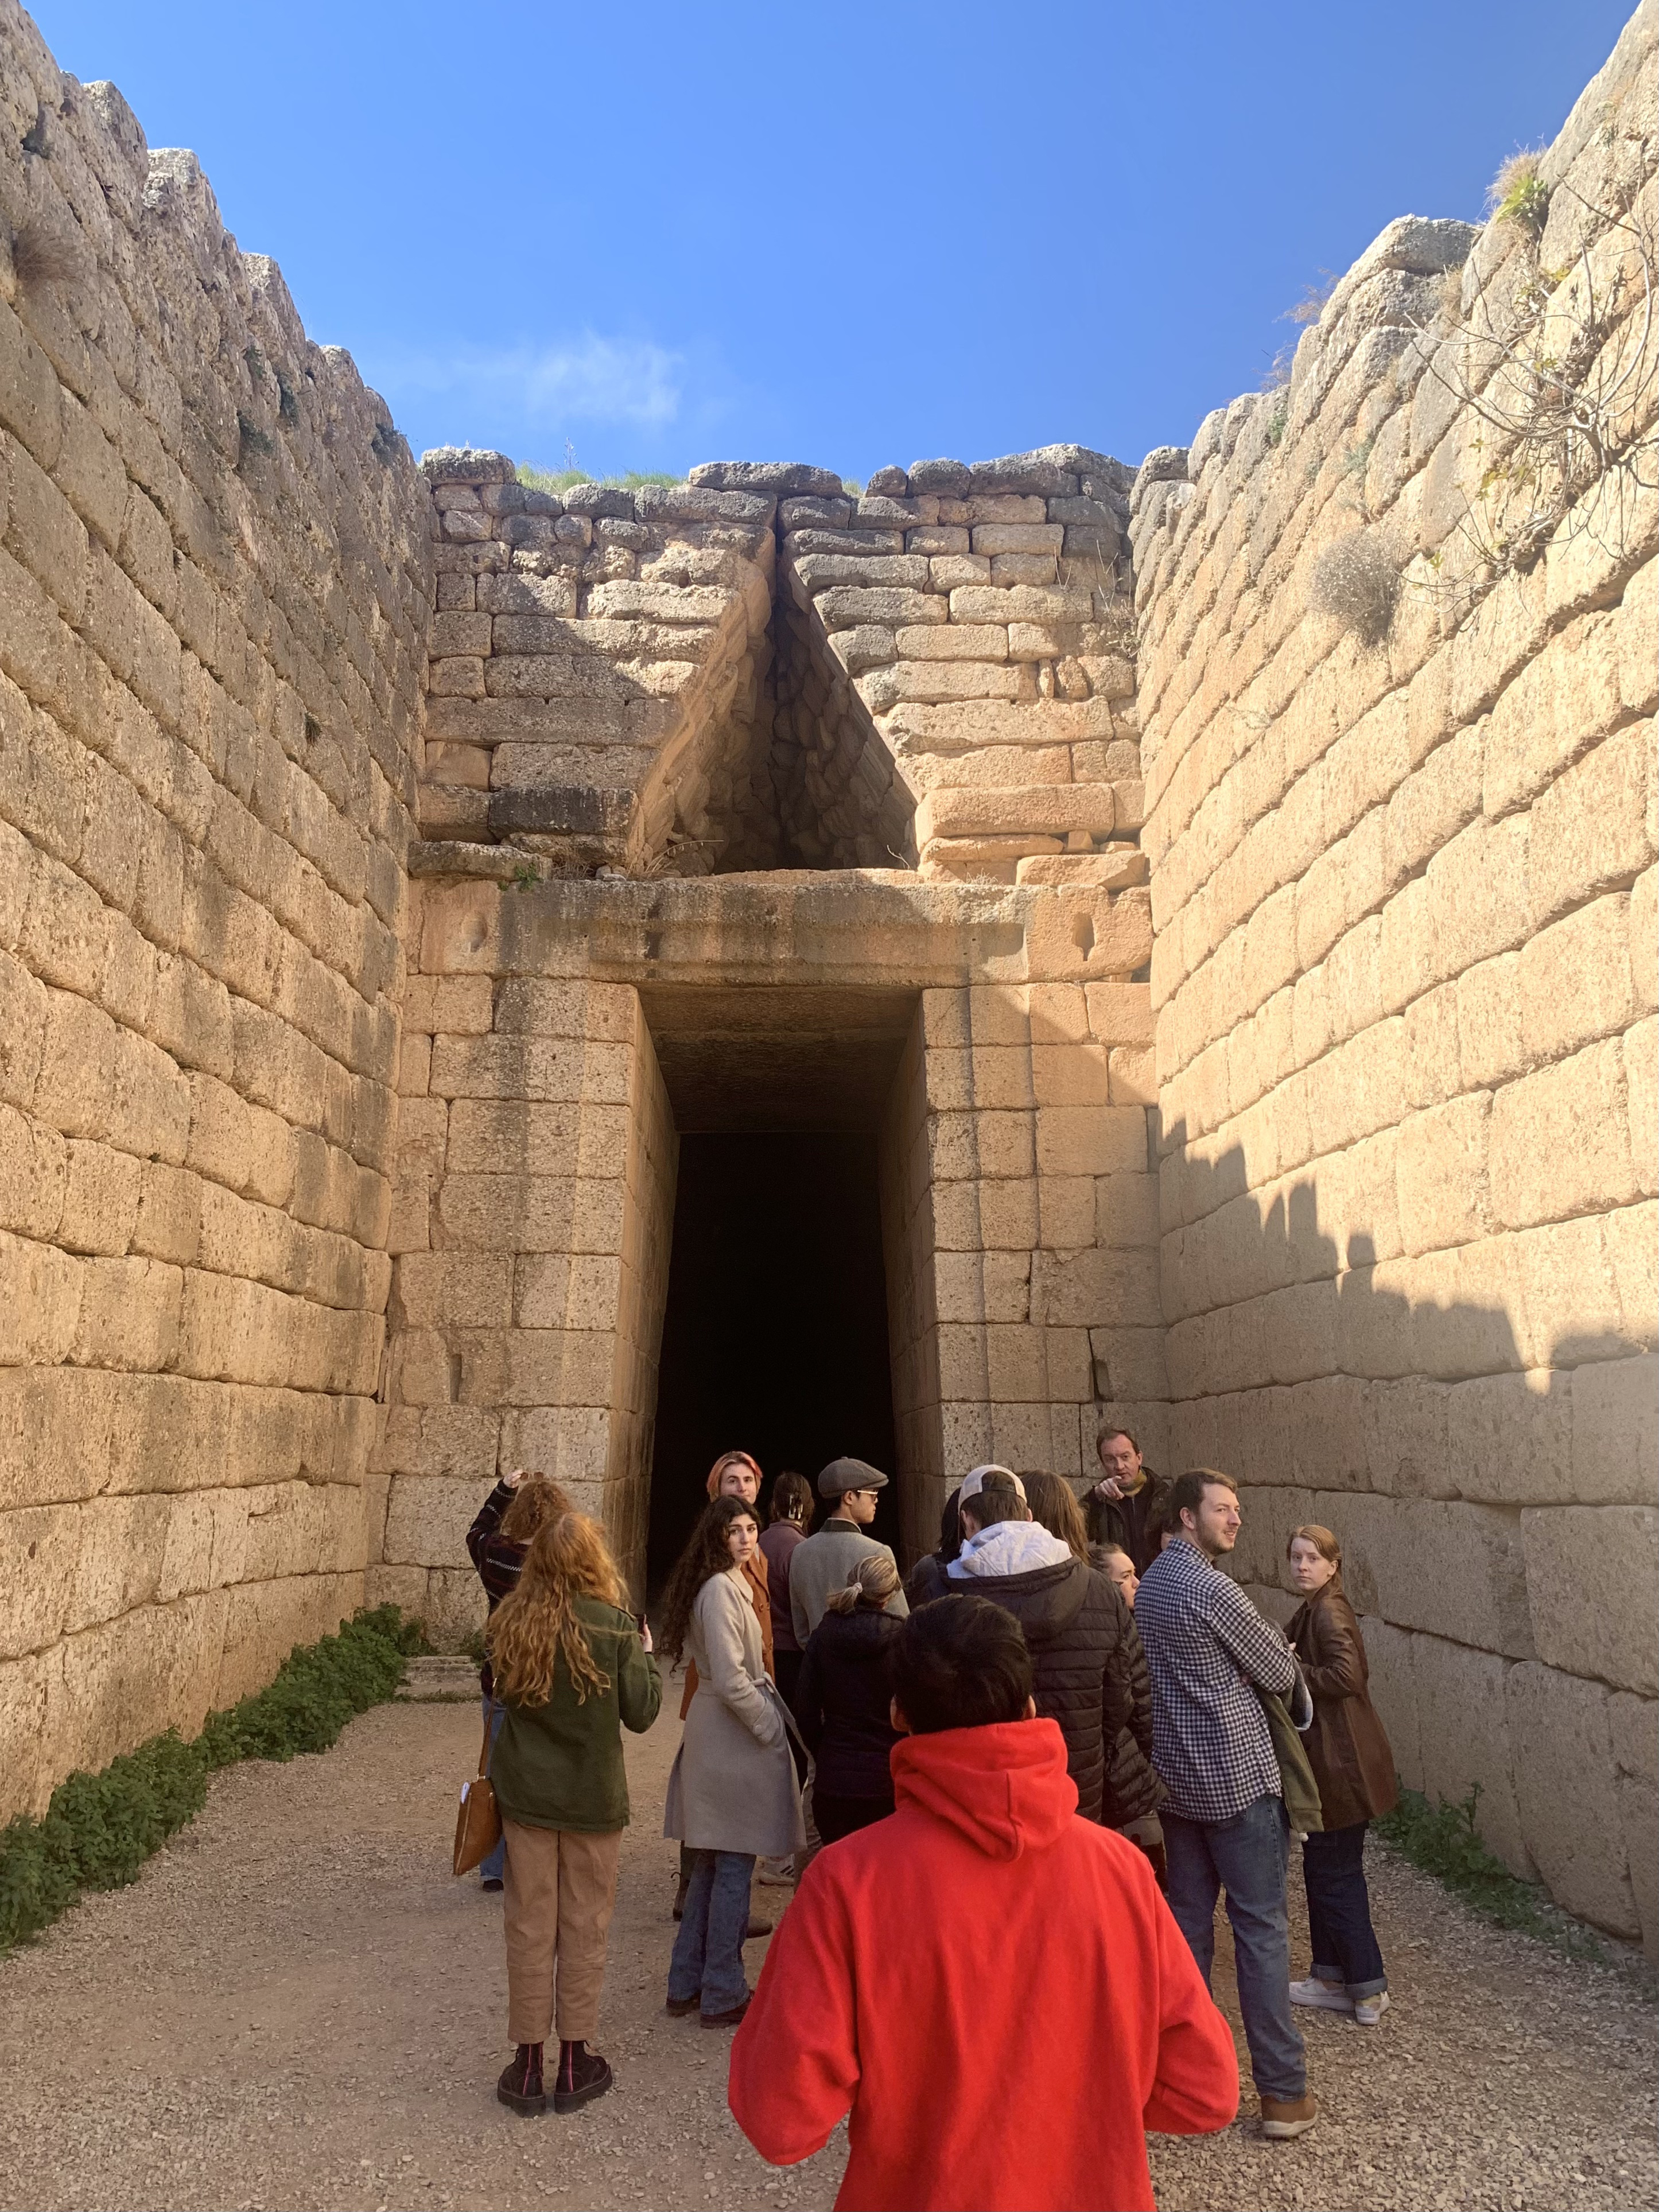 Group of students gather looking upward in subterranean, open-air stone ruin